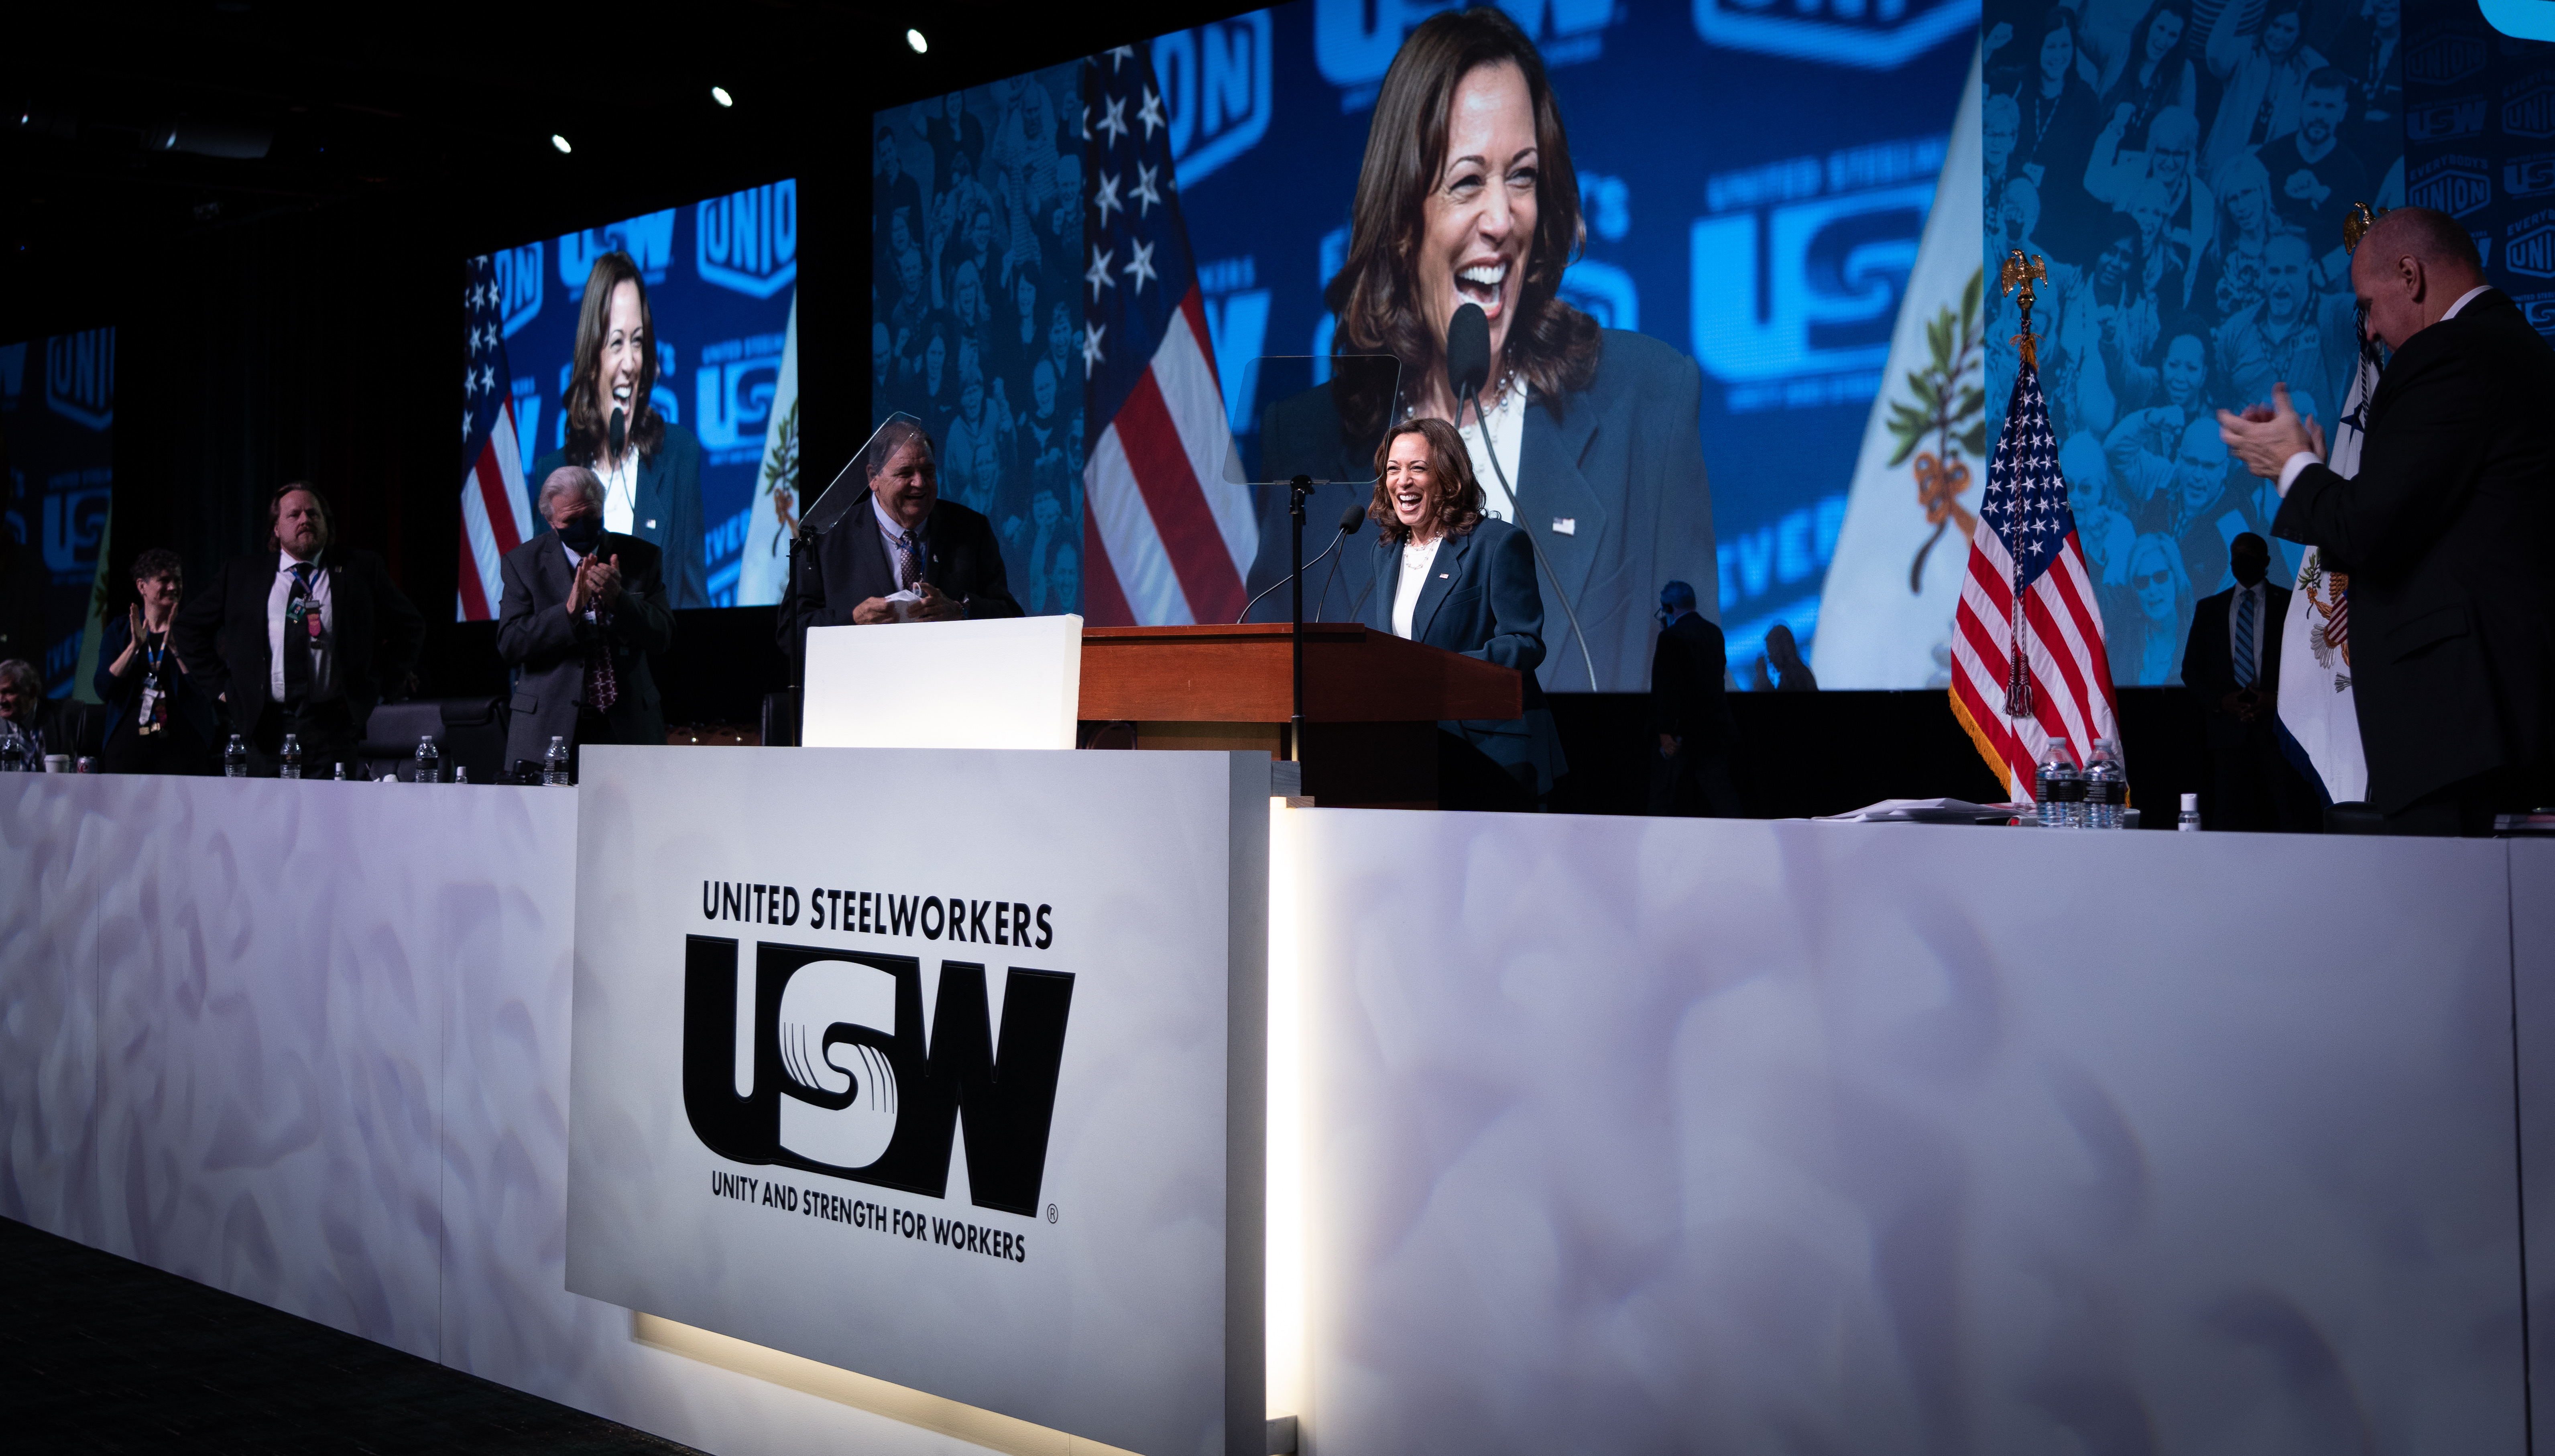 ‘The USW is Charting a New Era,’ VP Harris Says